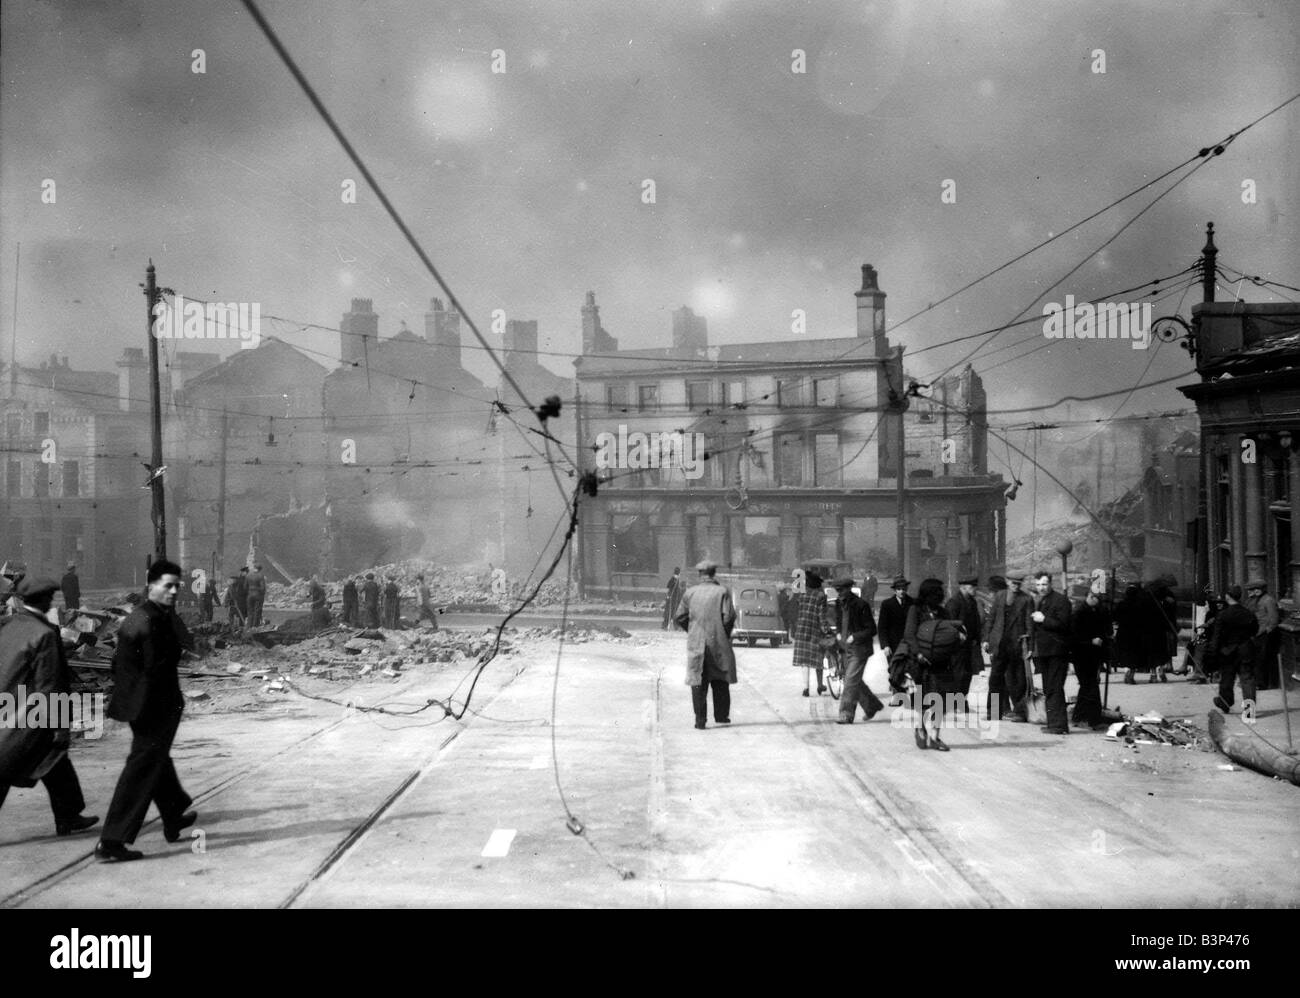 WW2 Air Raid Damage Liverpool Bomb damage in Liverpool civilians walking under damaged tram power lines after the blitz attack of the Germans circa 1940 Stock Photo